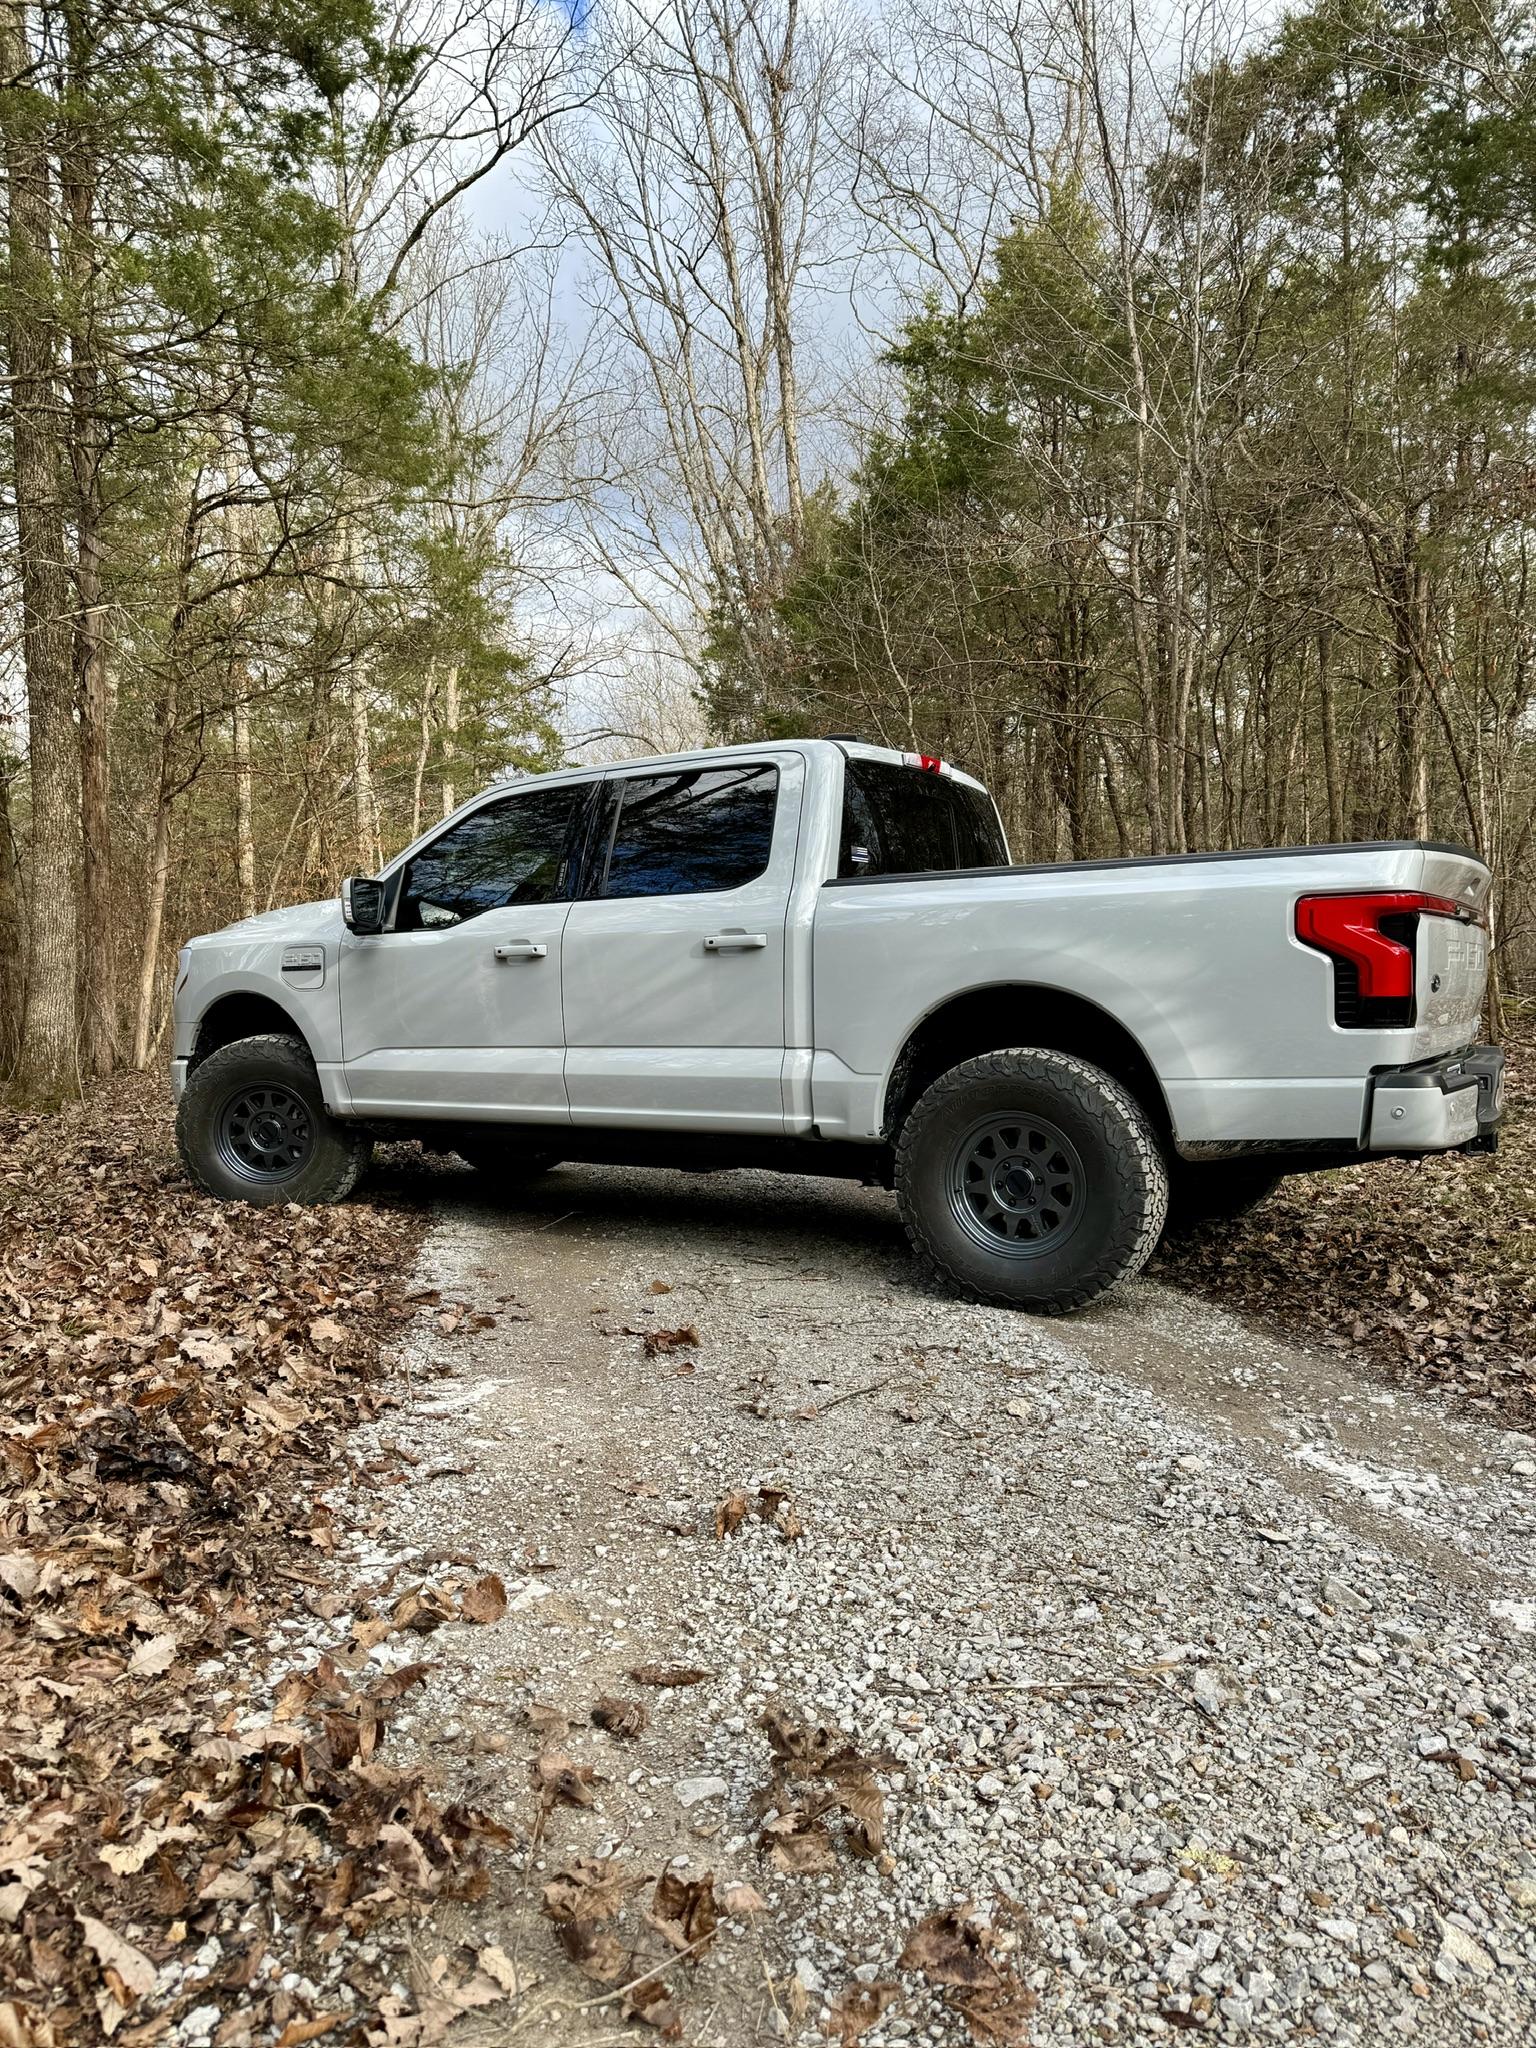 Ford F-150 Lightning Methods, BFG's, and Stage 3 Leveling Kit -- 2023 Lightning Build 7E7DB13F-0673-4FBE-A4A8-6DEC81A02509_1_102_a